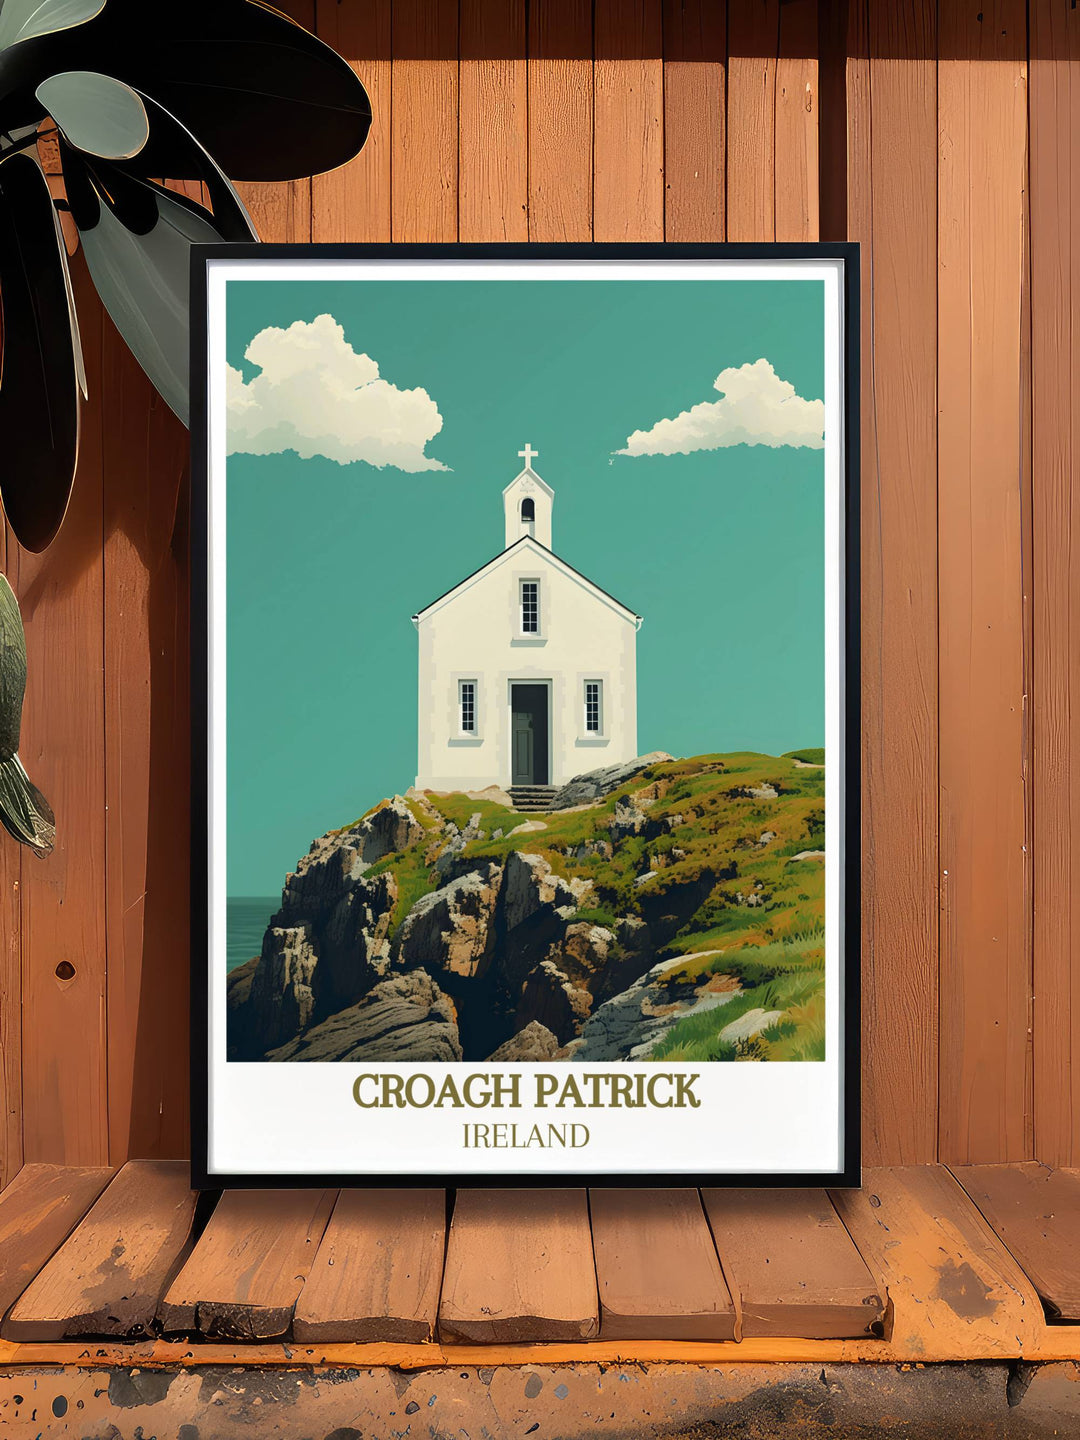 Experience the spiritual journey of the Croagh Patrick Trail with this travel poster depicting the majestic mountain and the historic St Patricks Church. Ideal for those who appreciate Ireland Catholic themes and Irish wall art.